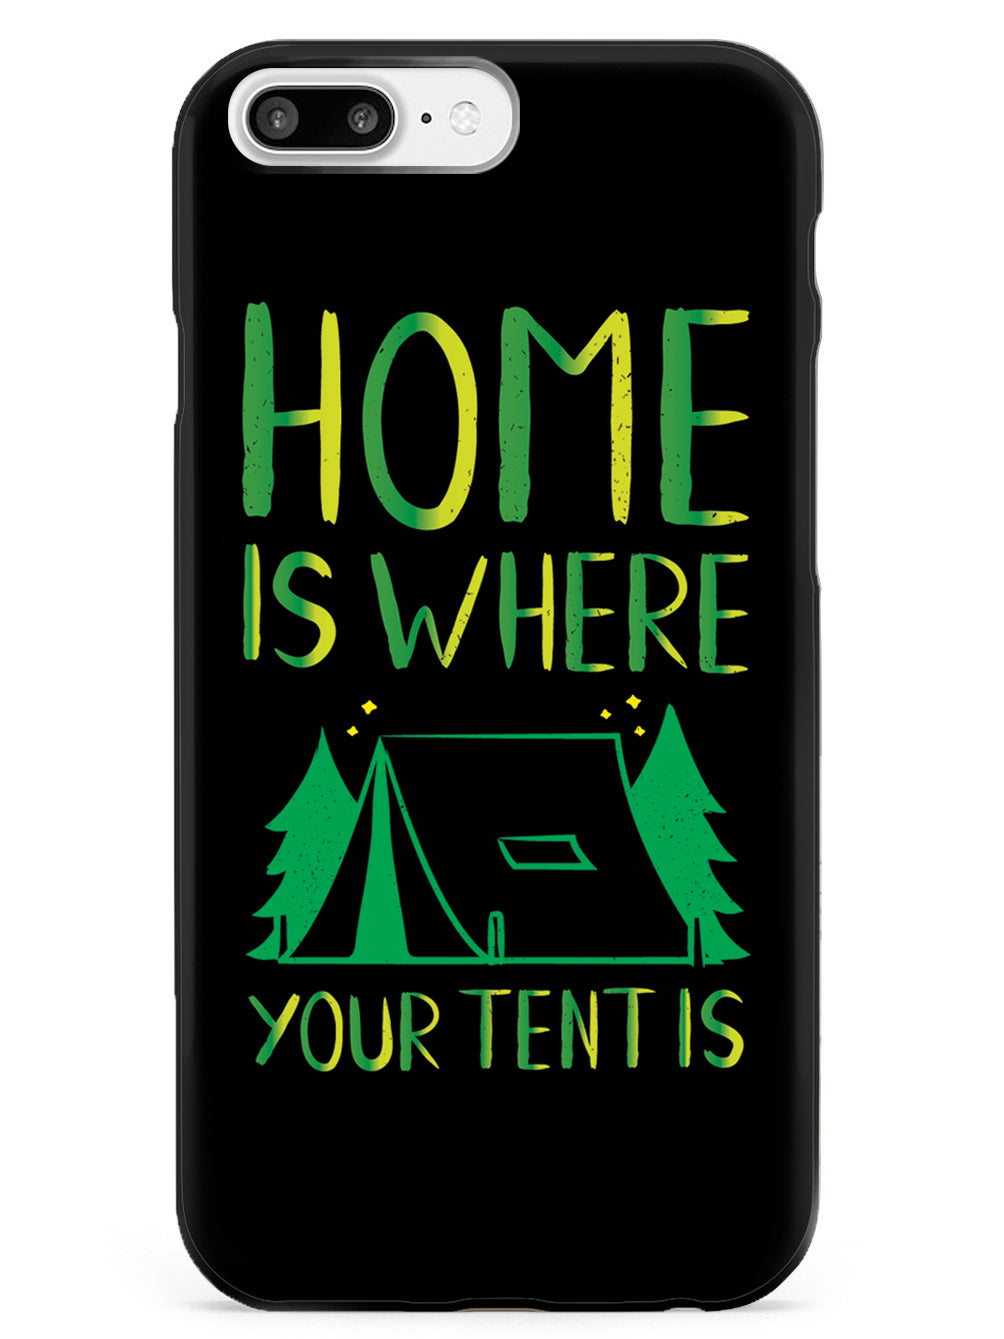 Home Is Where Your Tent Is - Black Case